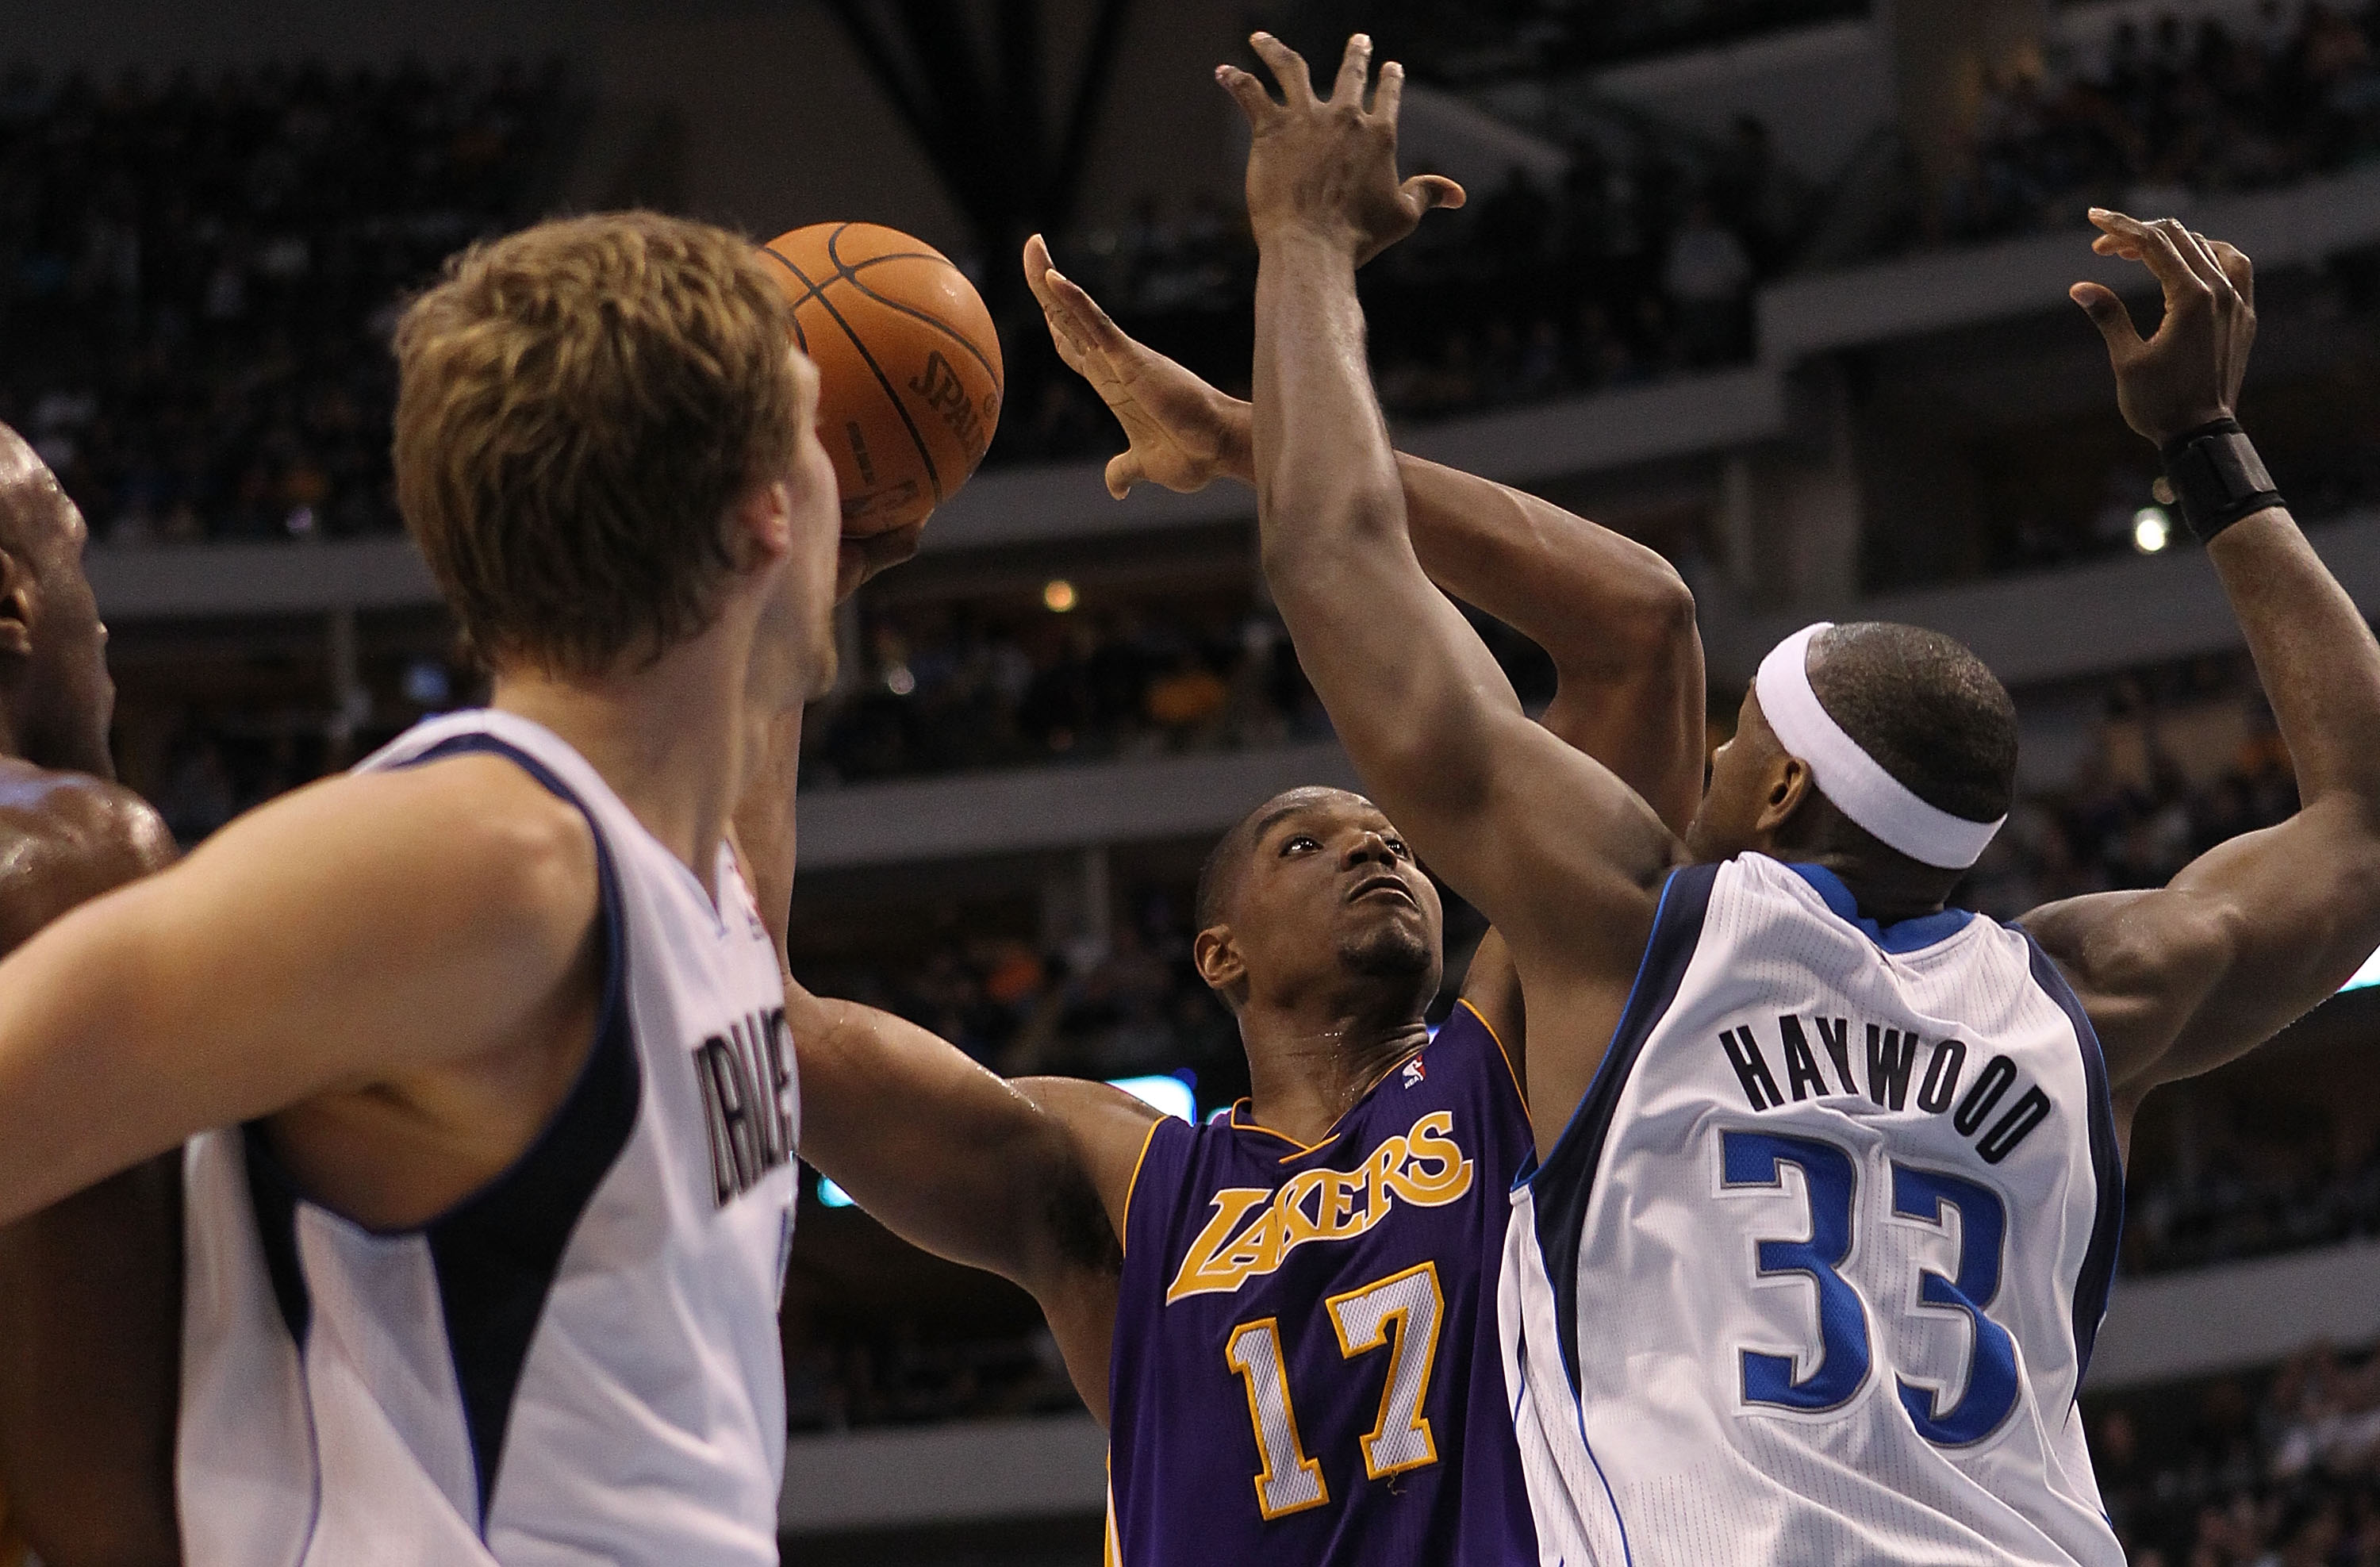 DALLAS, TX - MARCH 12:  Center Andrew Bynum #17 of the Los Angeles Lakers takes a shot against Brendan Haywood #33 of the Dallas Mavericks at American Airlines Center on March 12, 2011 in Dallas, Texas.  NOTE TO USER: User expressly acknowledges and agree